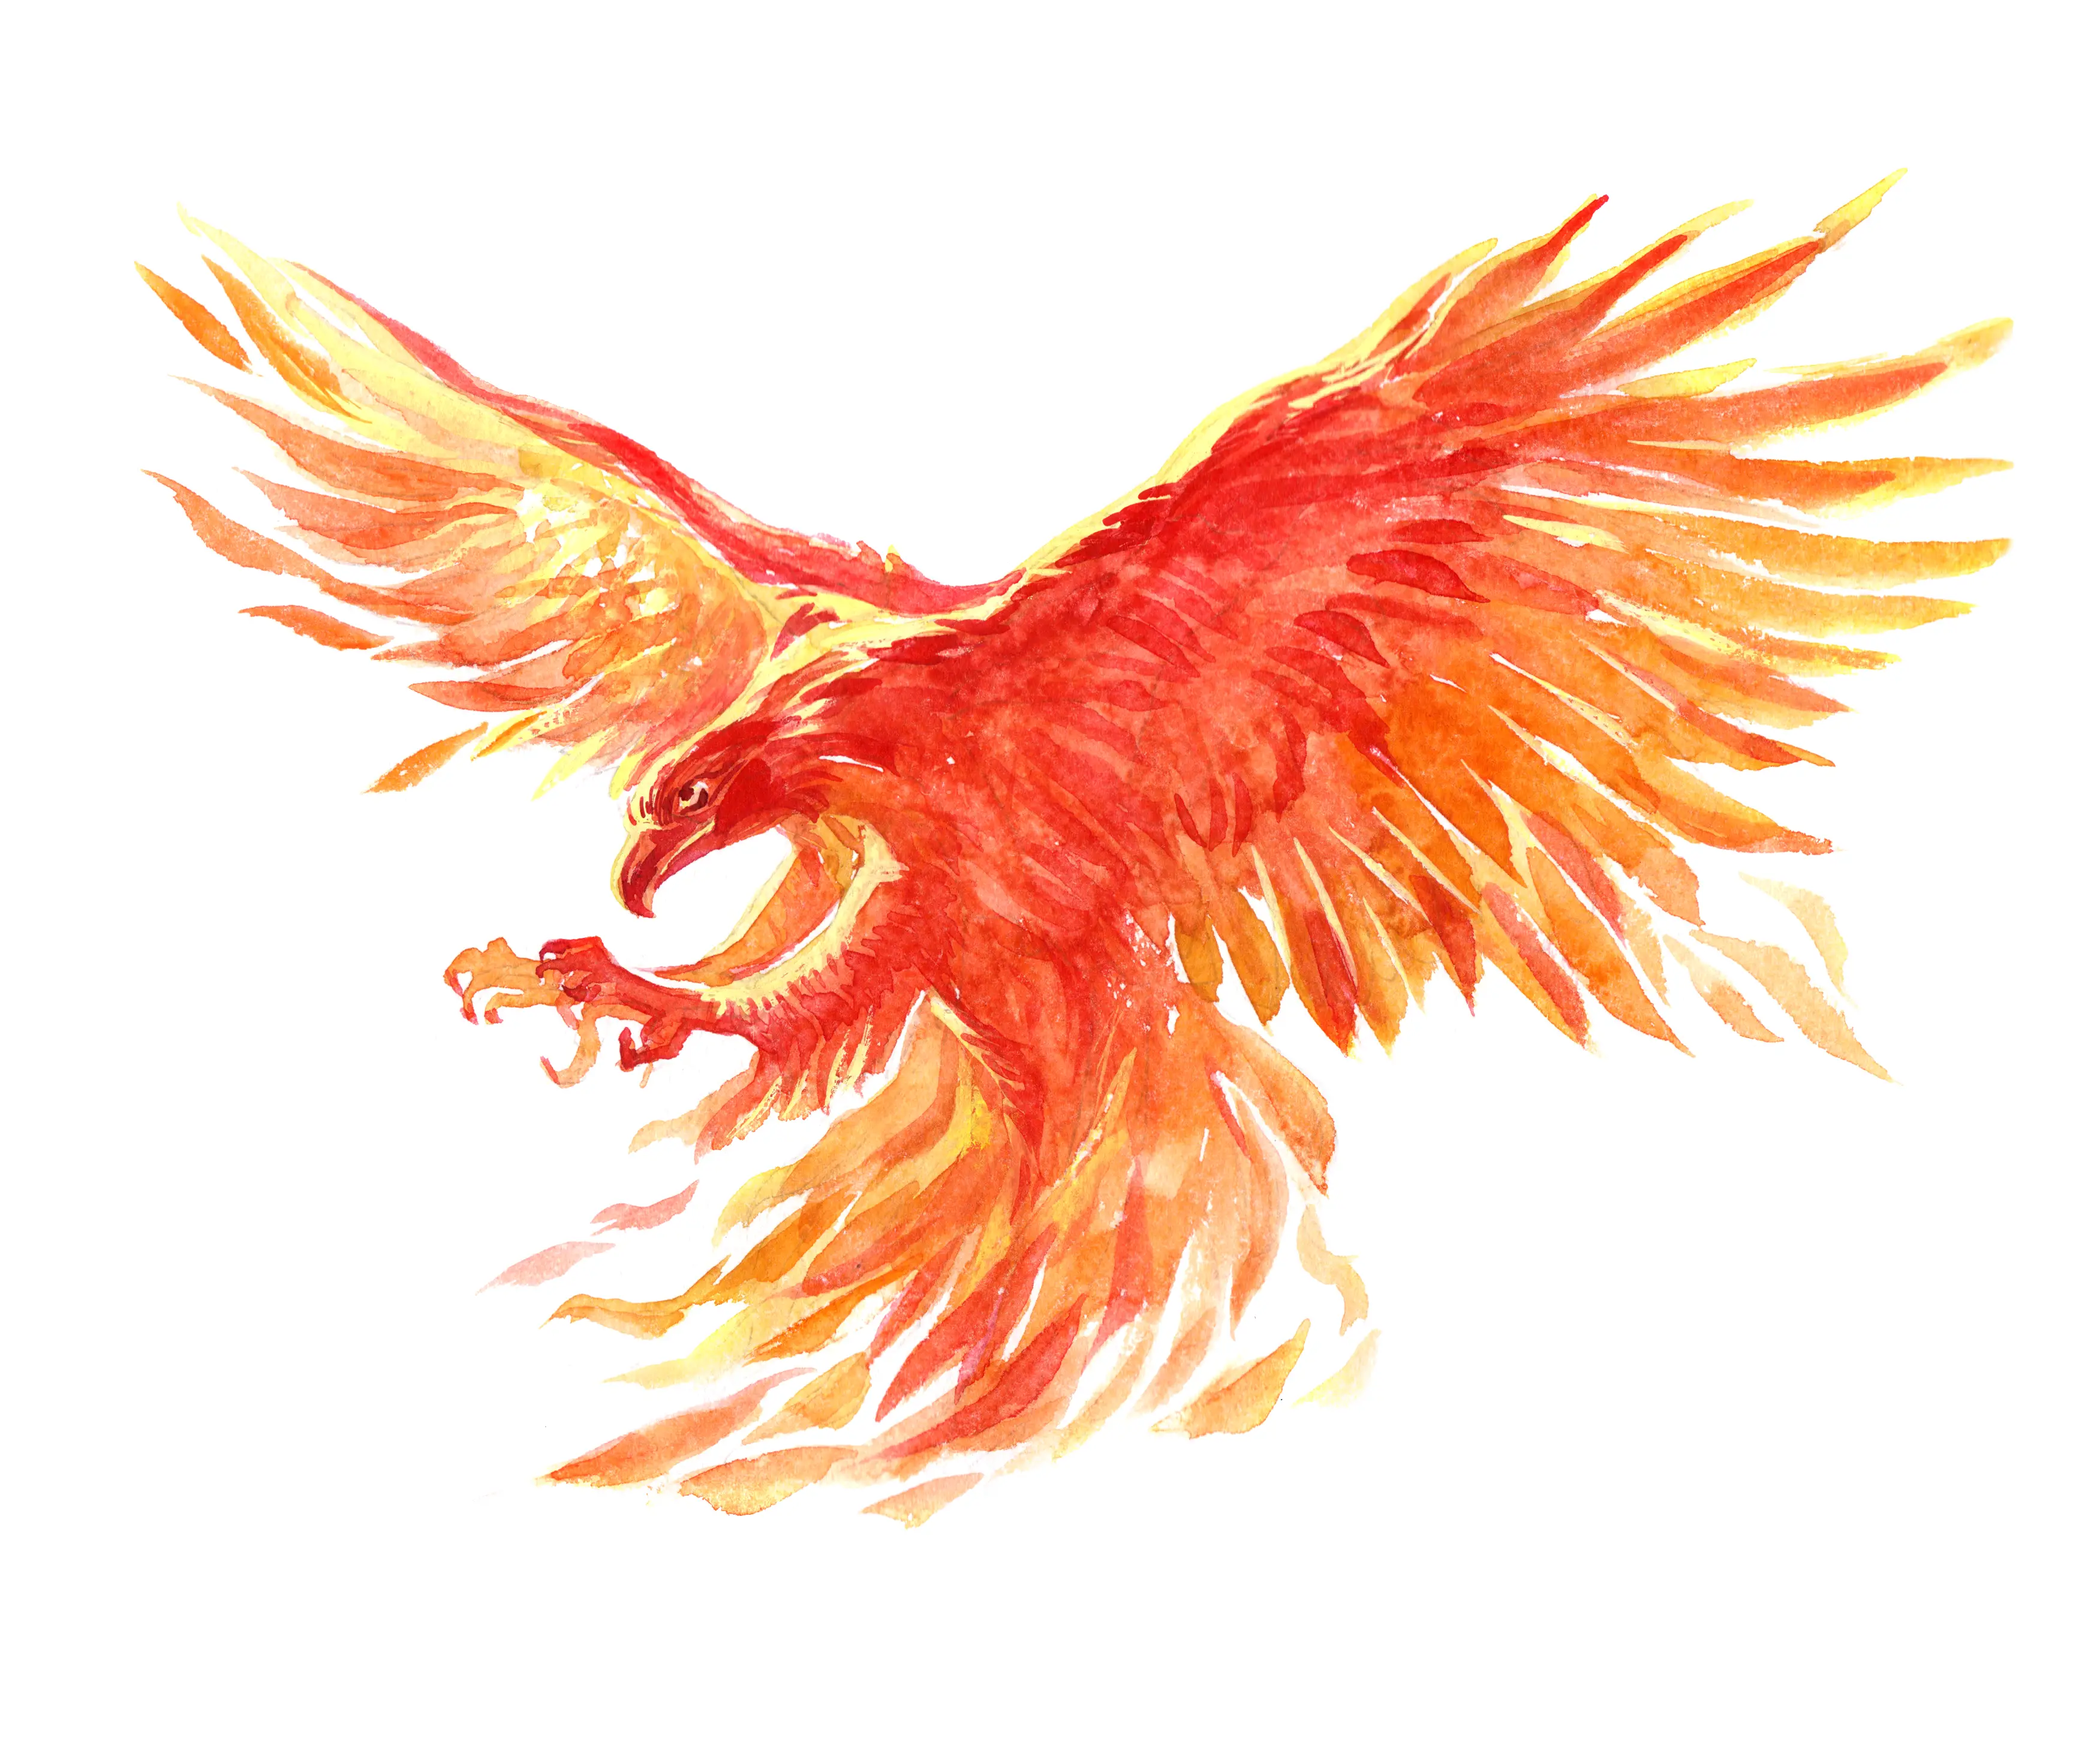 Watercolor single character mystical mythical character phoenix isolated